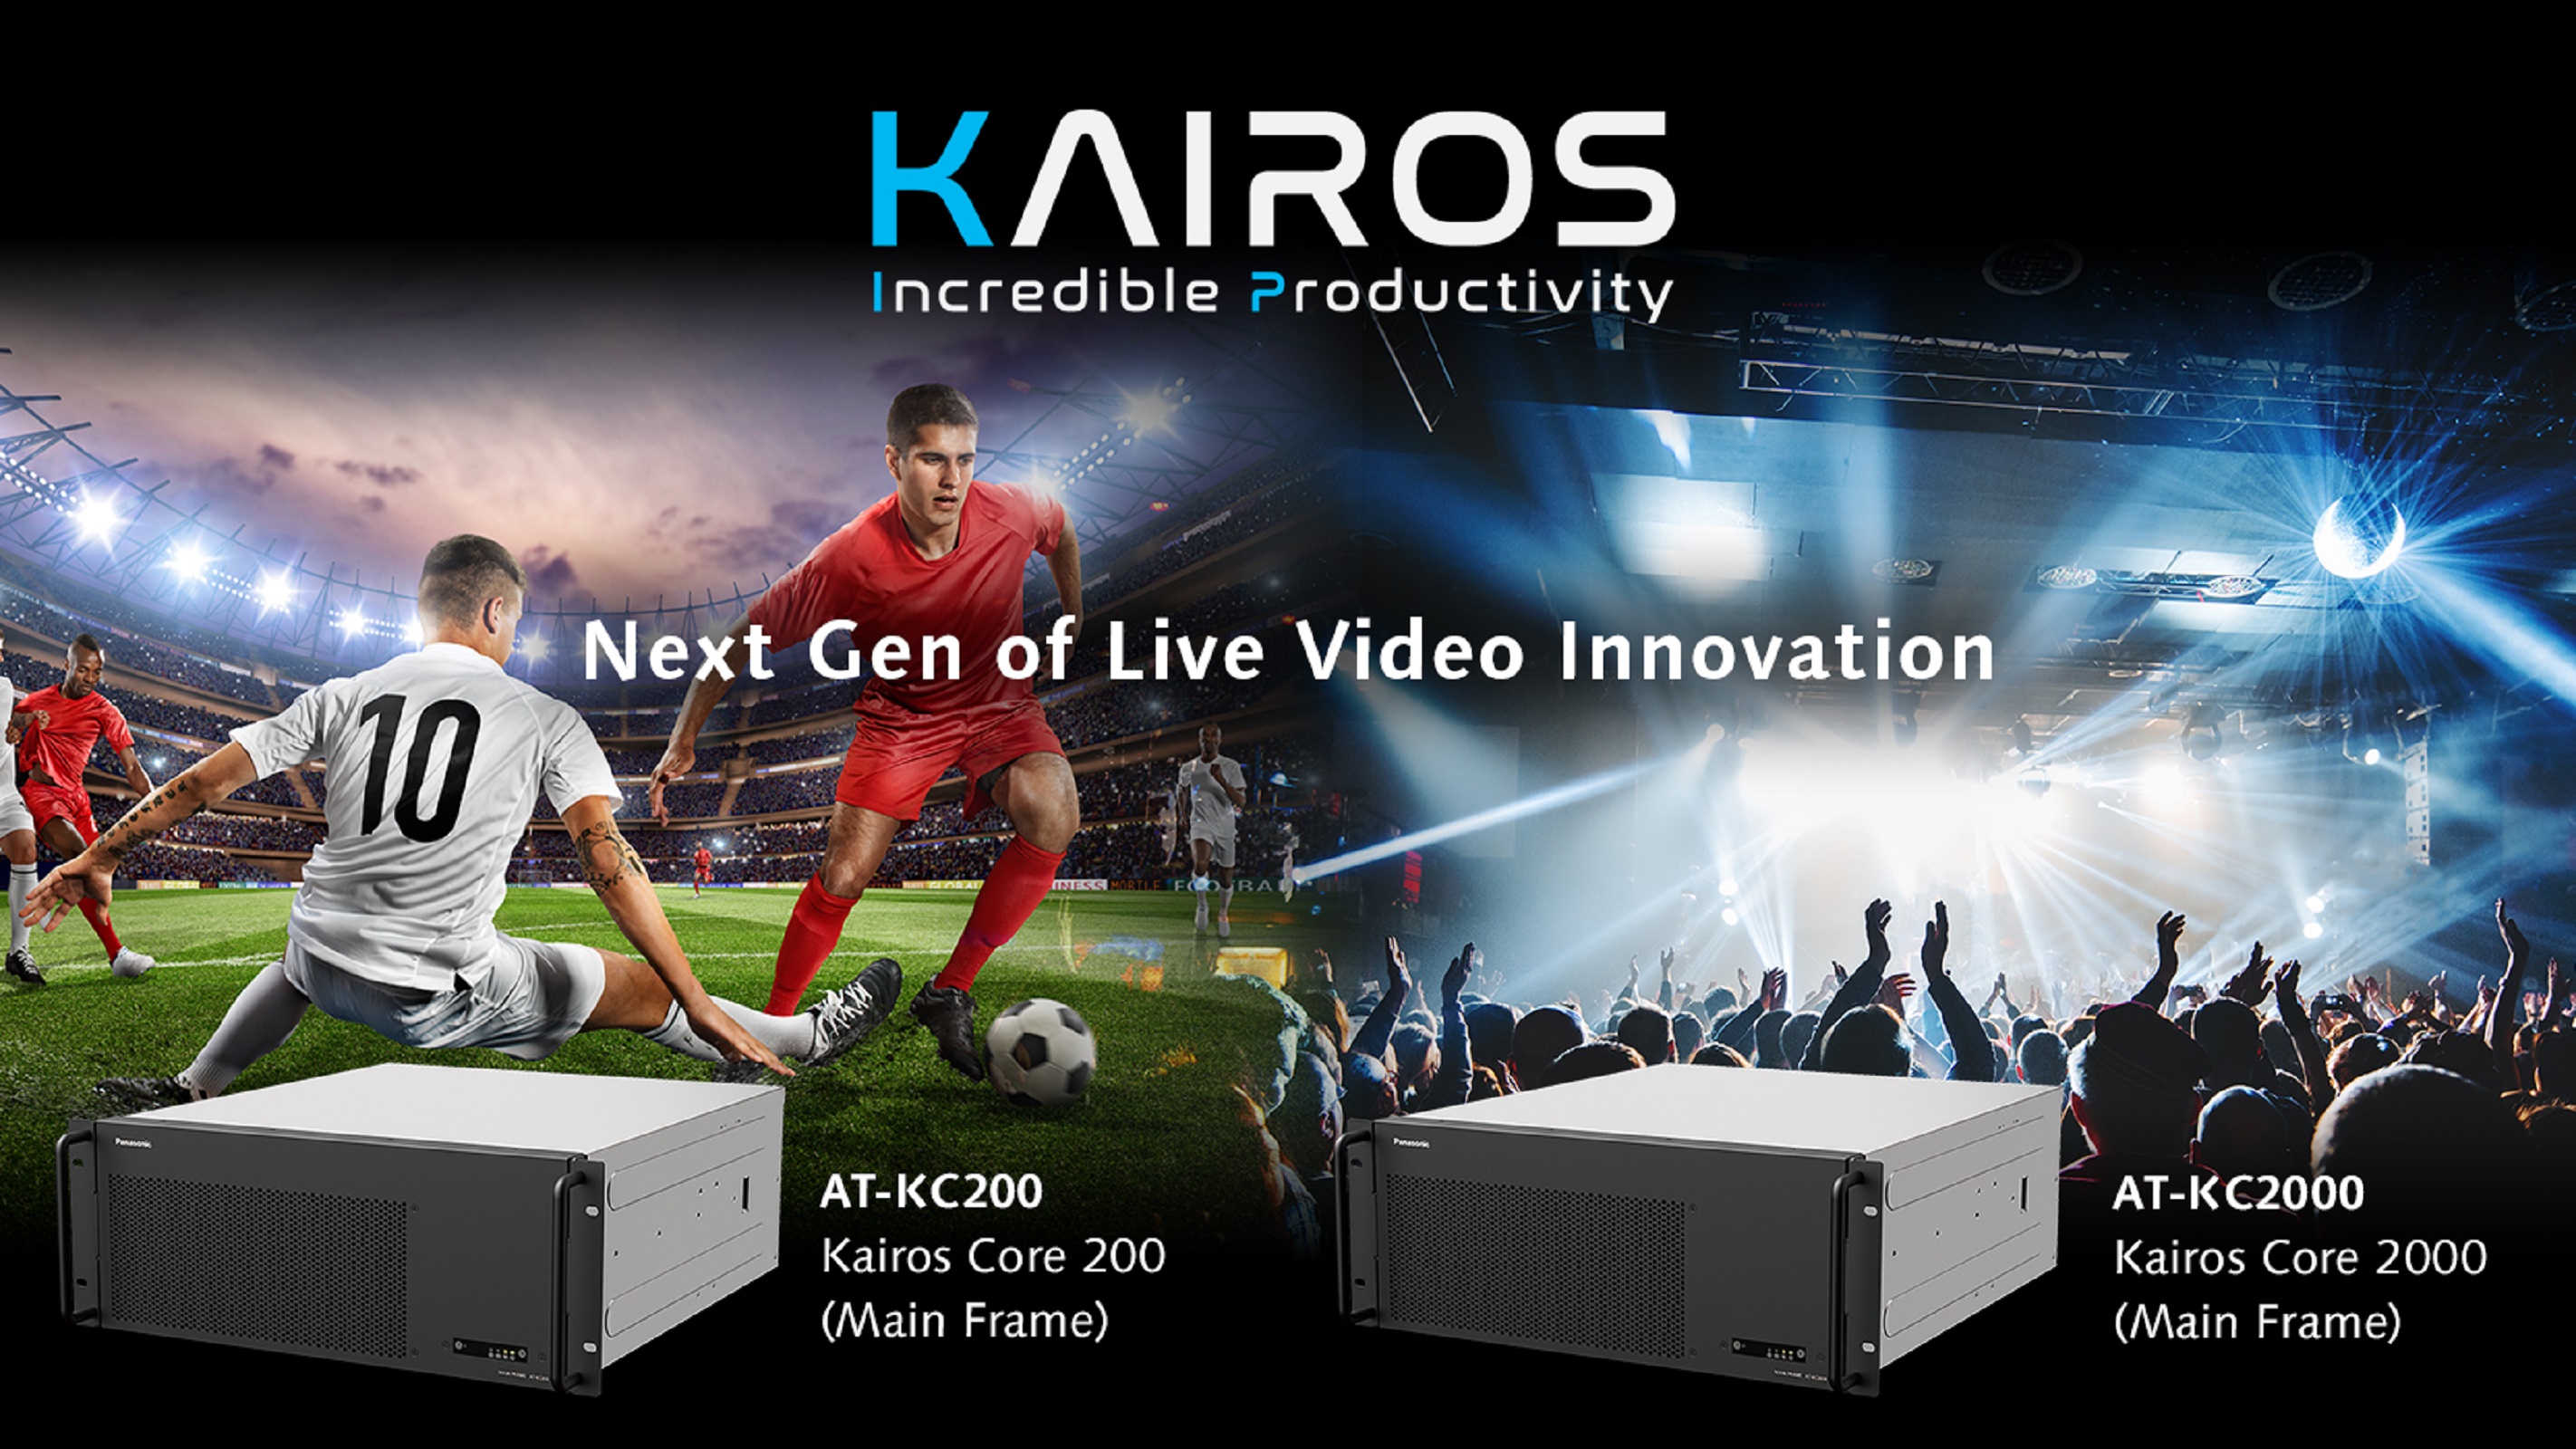 Kairos: The next generation of live video innovation